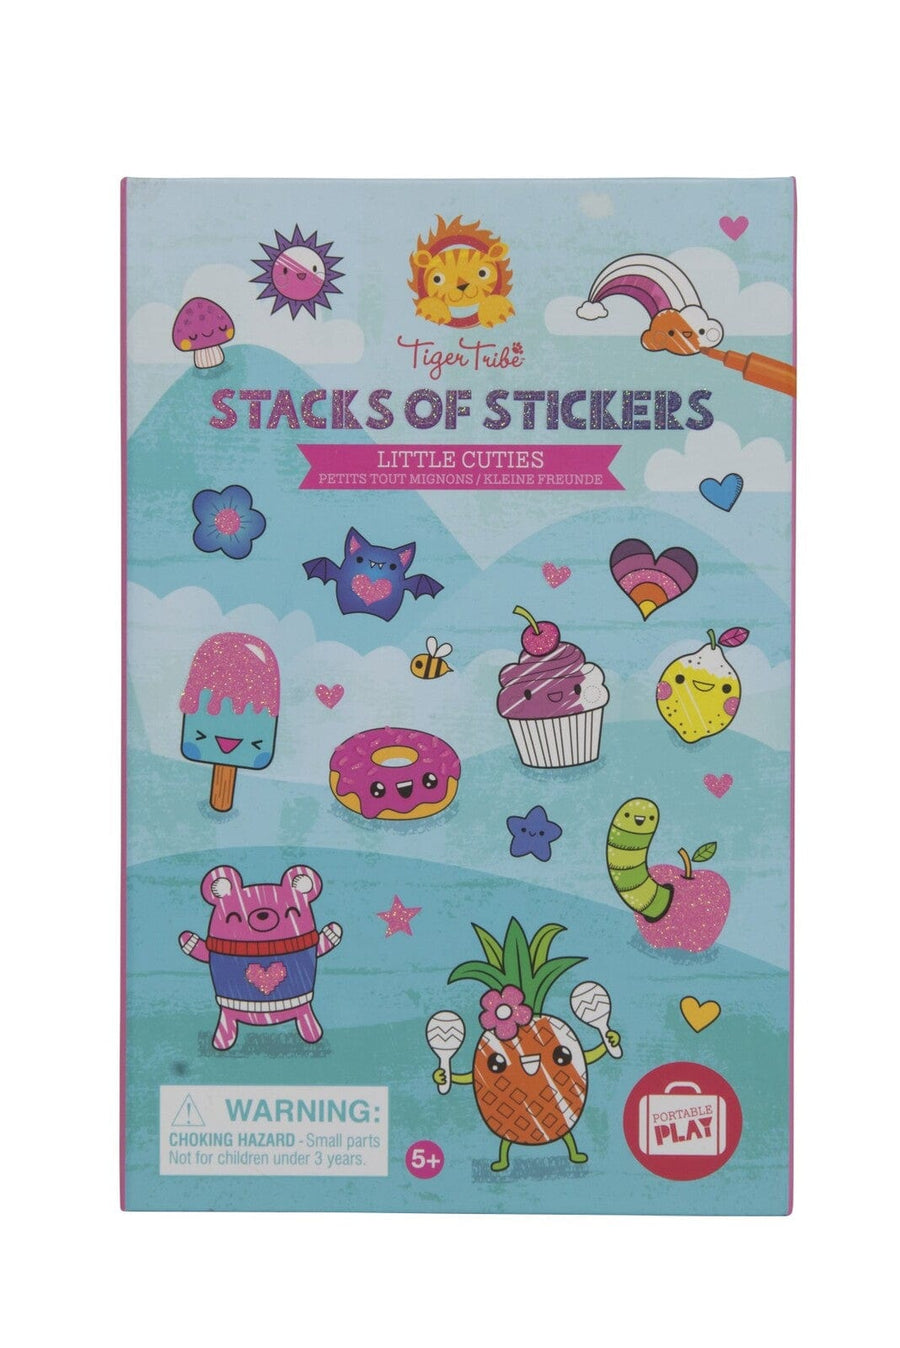 TigerTribe Art & Craft Stacks of Stickers - Little Cuties